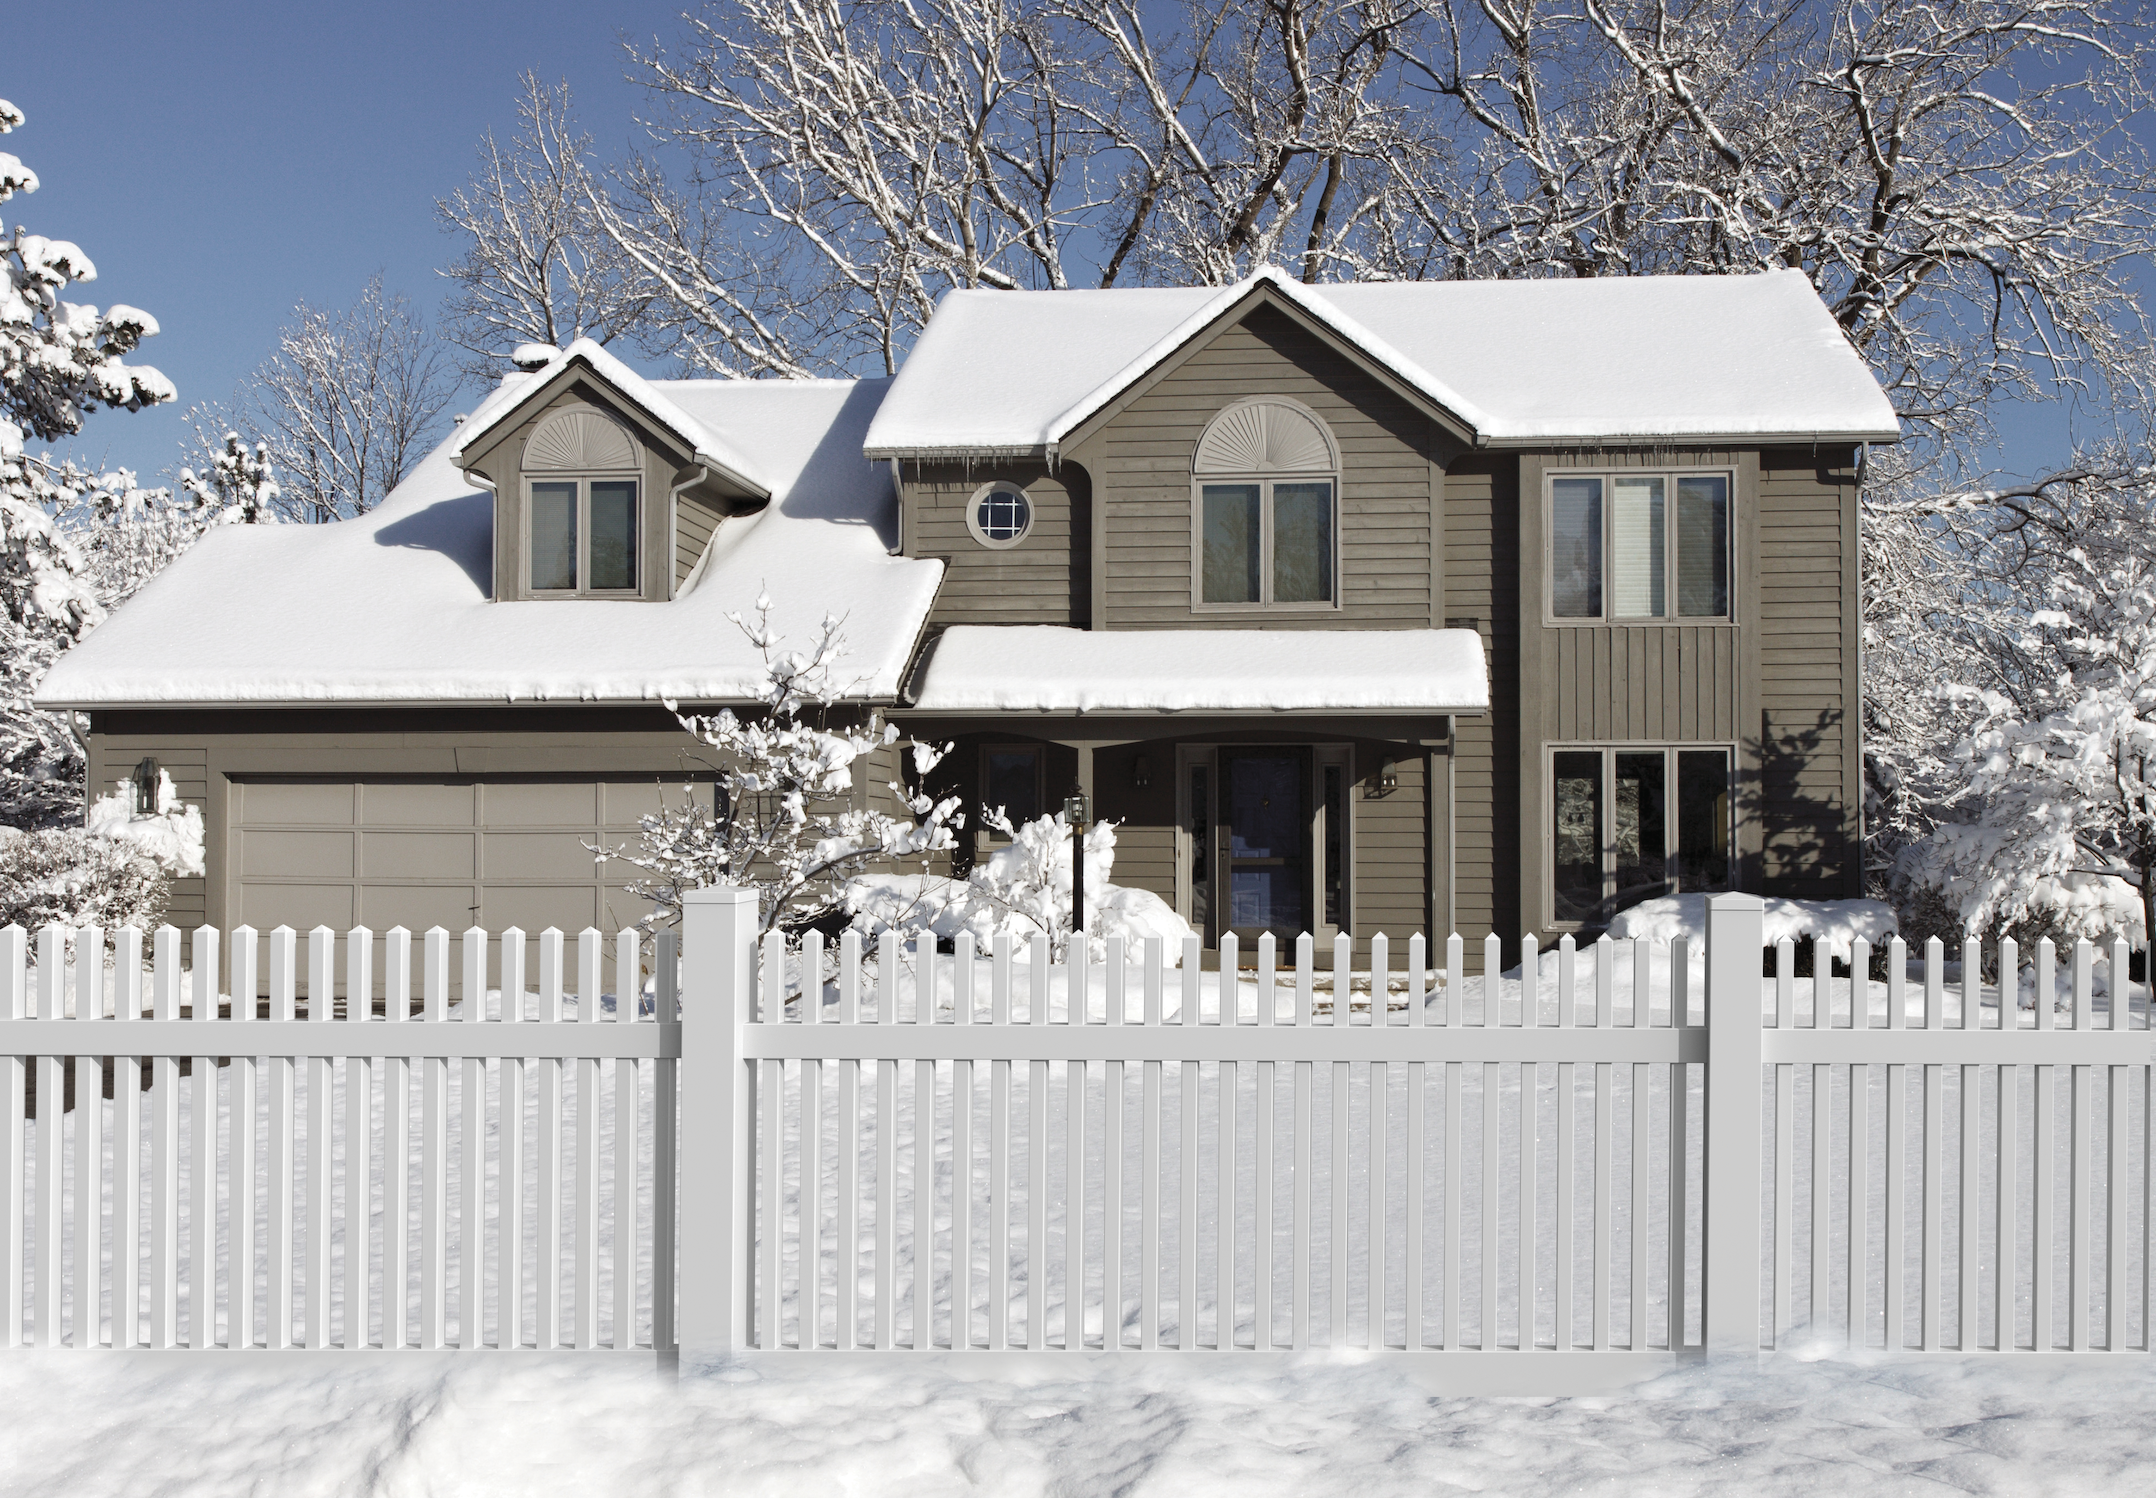 Winter Lawn & Fence Care Tips